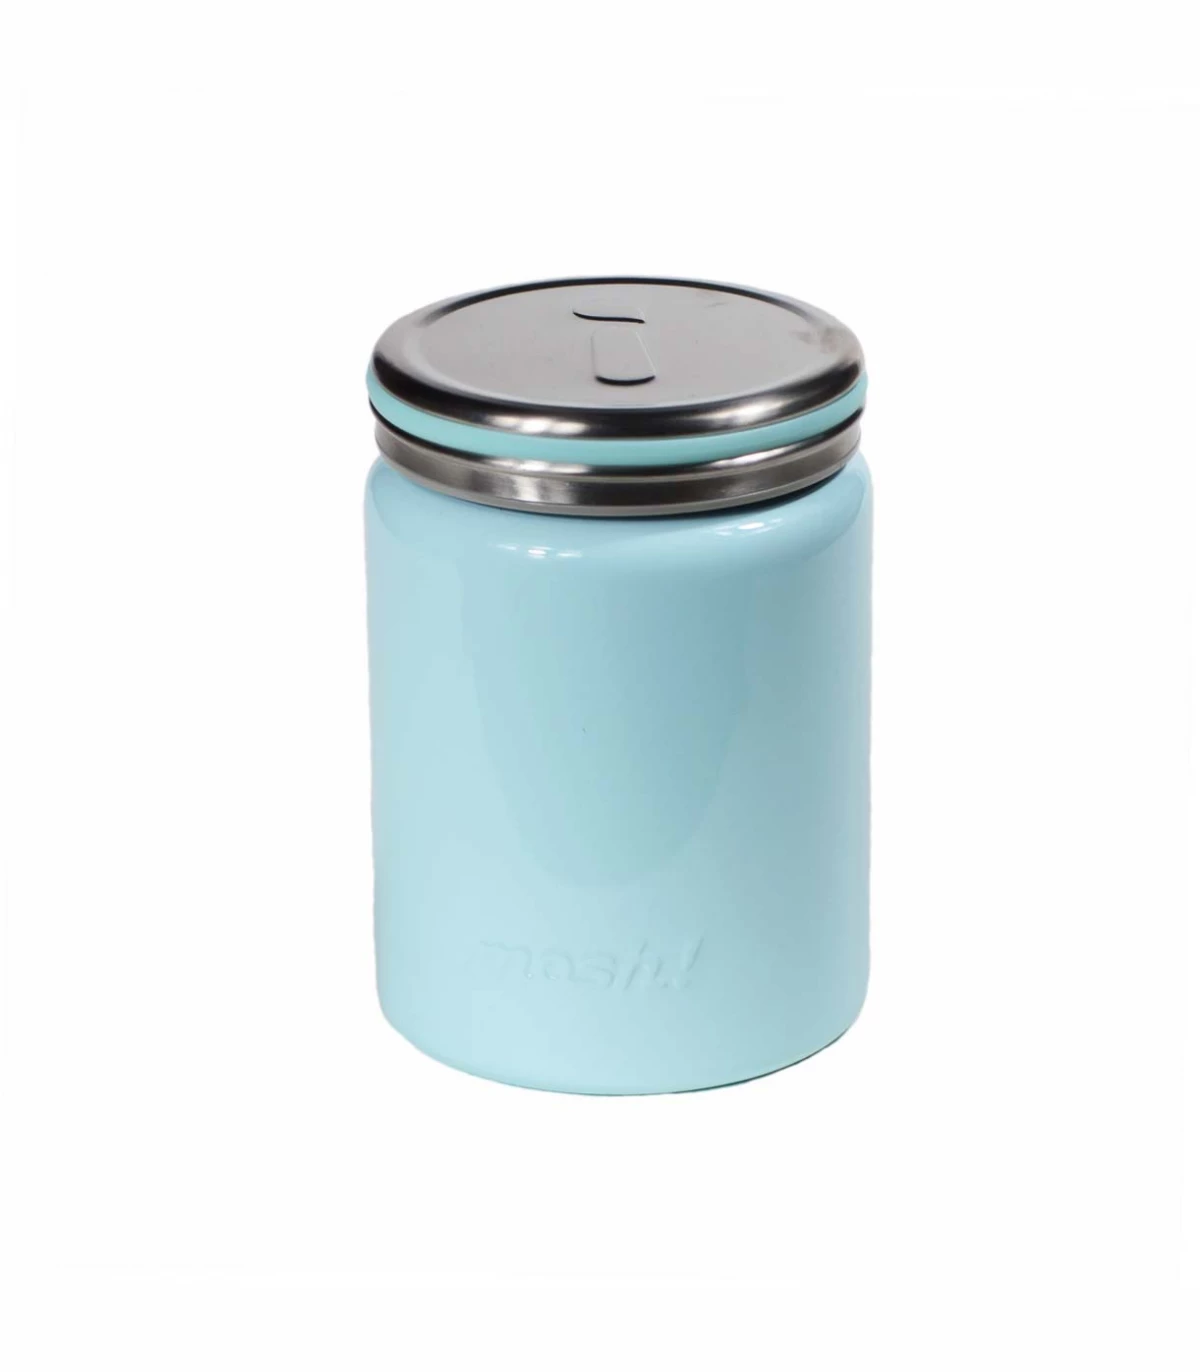 https://takaterra.com/3807-superlarge_default/insulated-food-container-stainless-steel-blue-mosh.webp